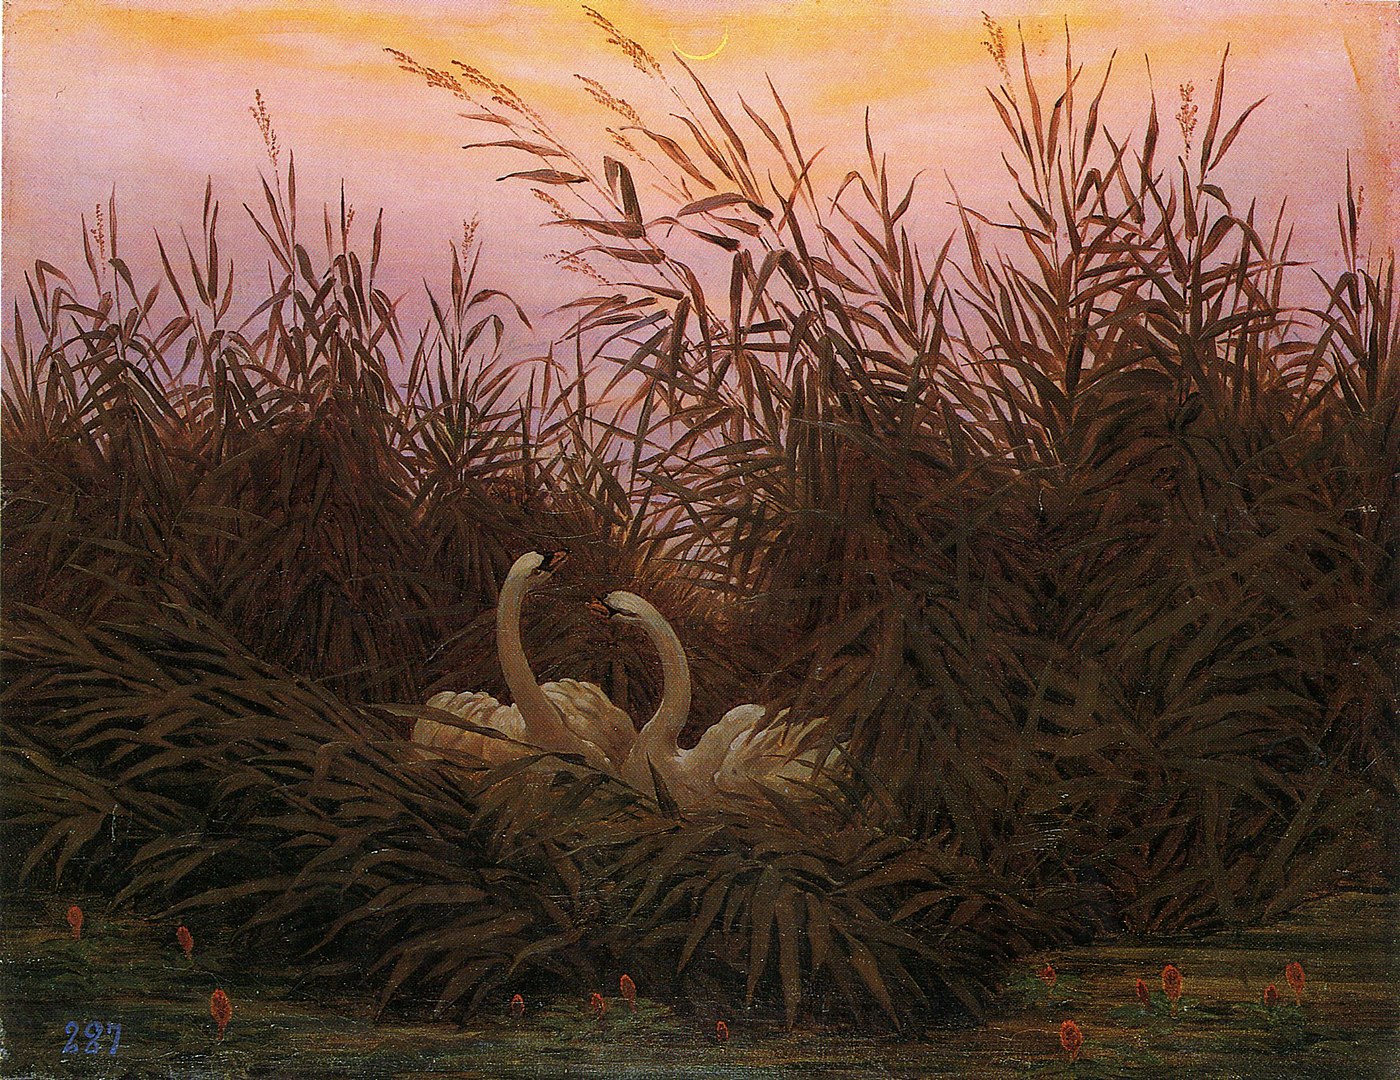 A pair of swan nestled in reeds at dawn